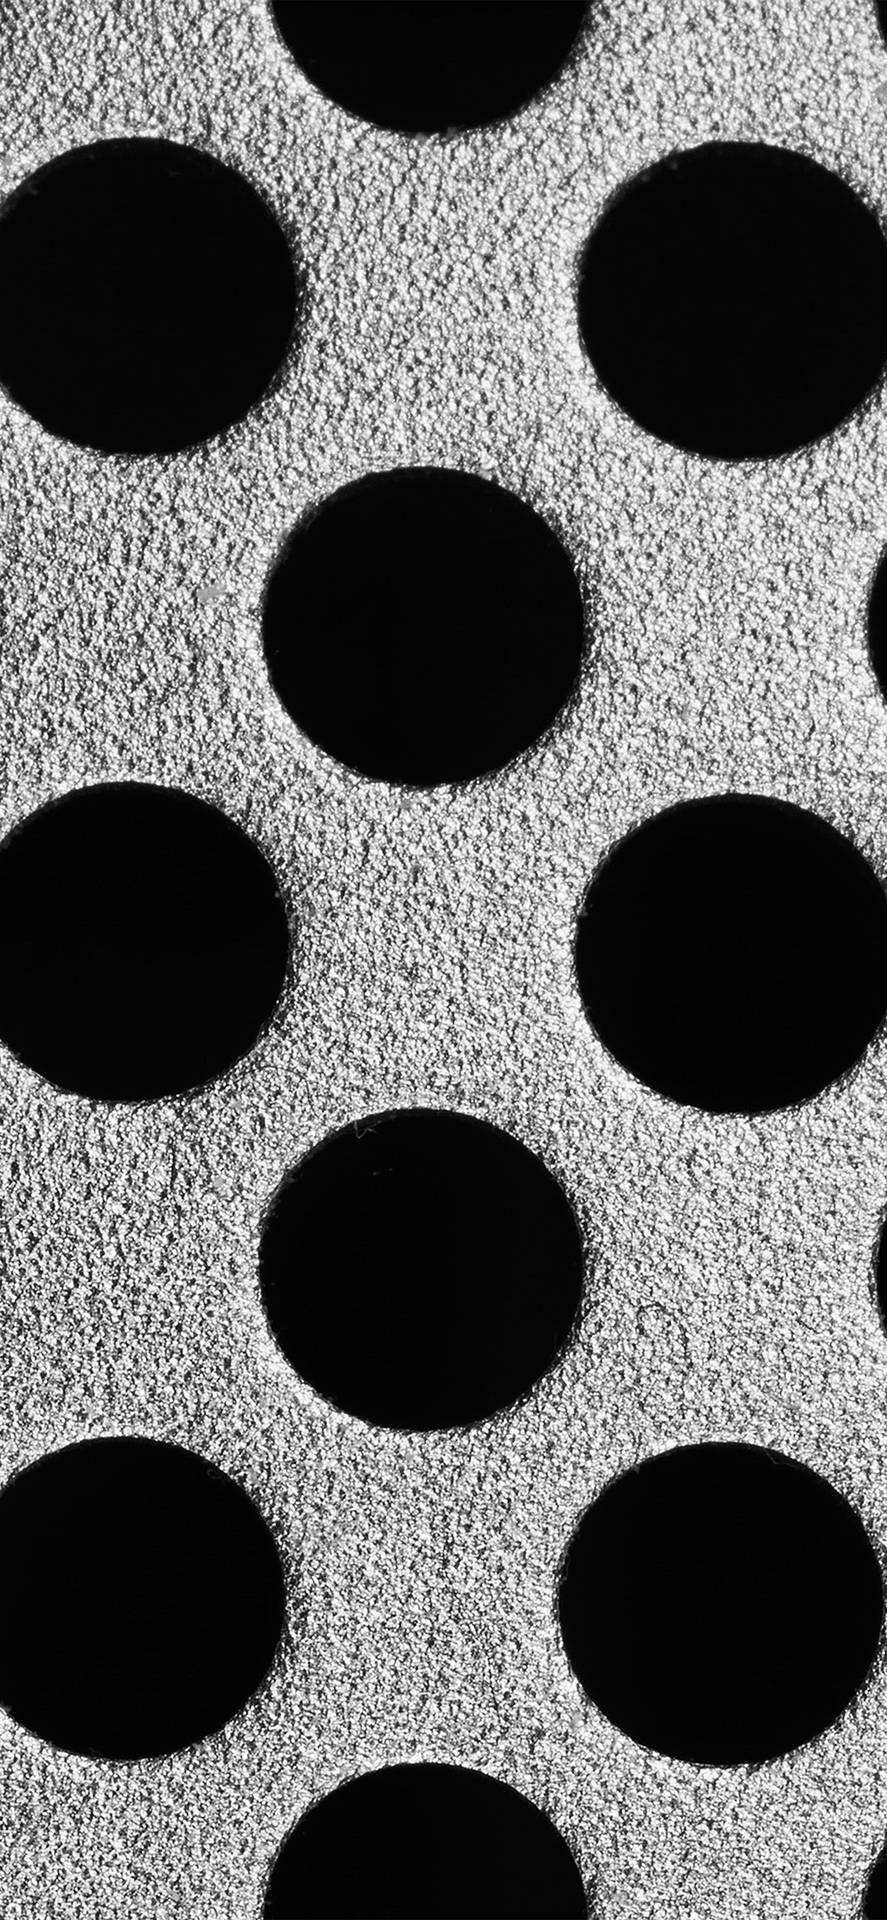 Rough Surface Black Dot Iphone Background